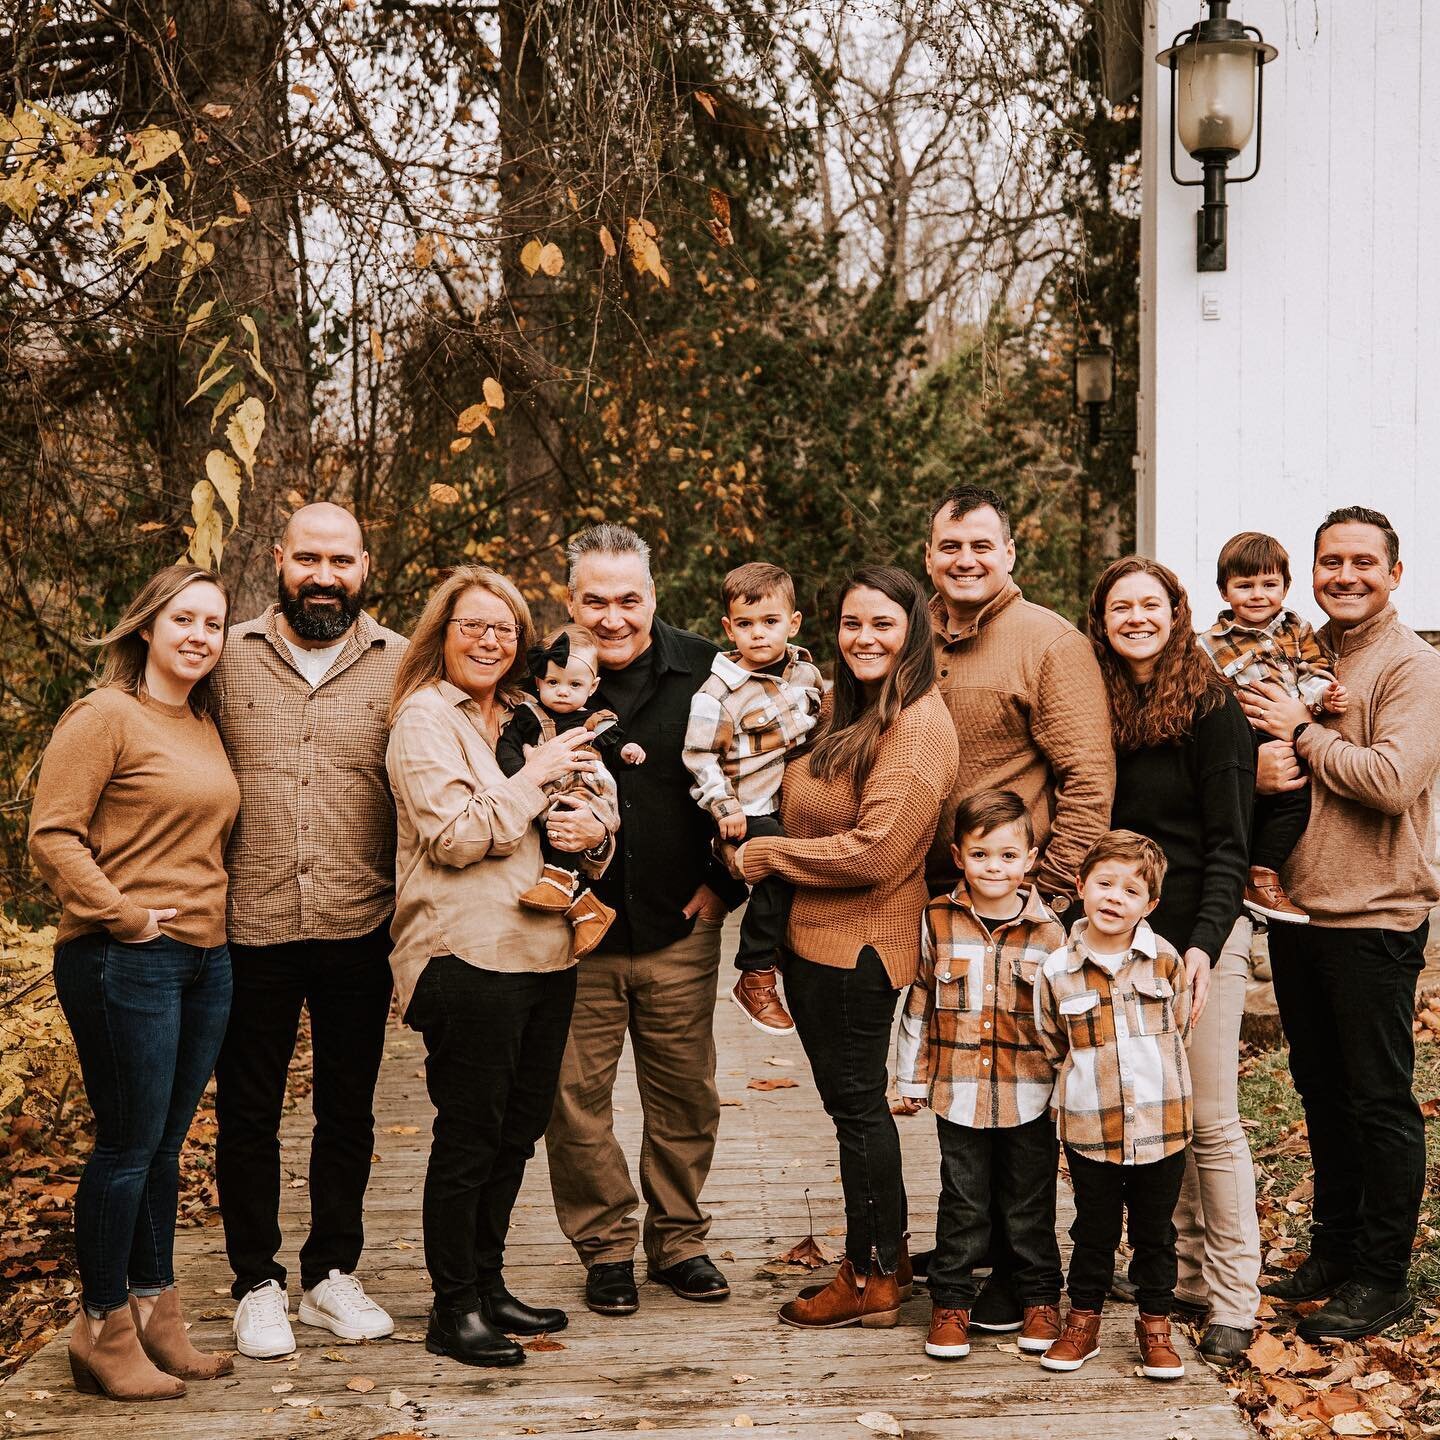 Extended family photo sessions truly have my heart. It reminds me I&rsquo;m capturing people&rsquo;s story - their lives. It&rsquo;s rare getting the entire family together, especially for pictures. But these are important moments to capture. It&rsqu